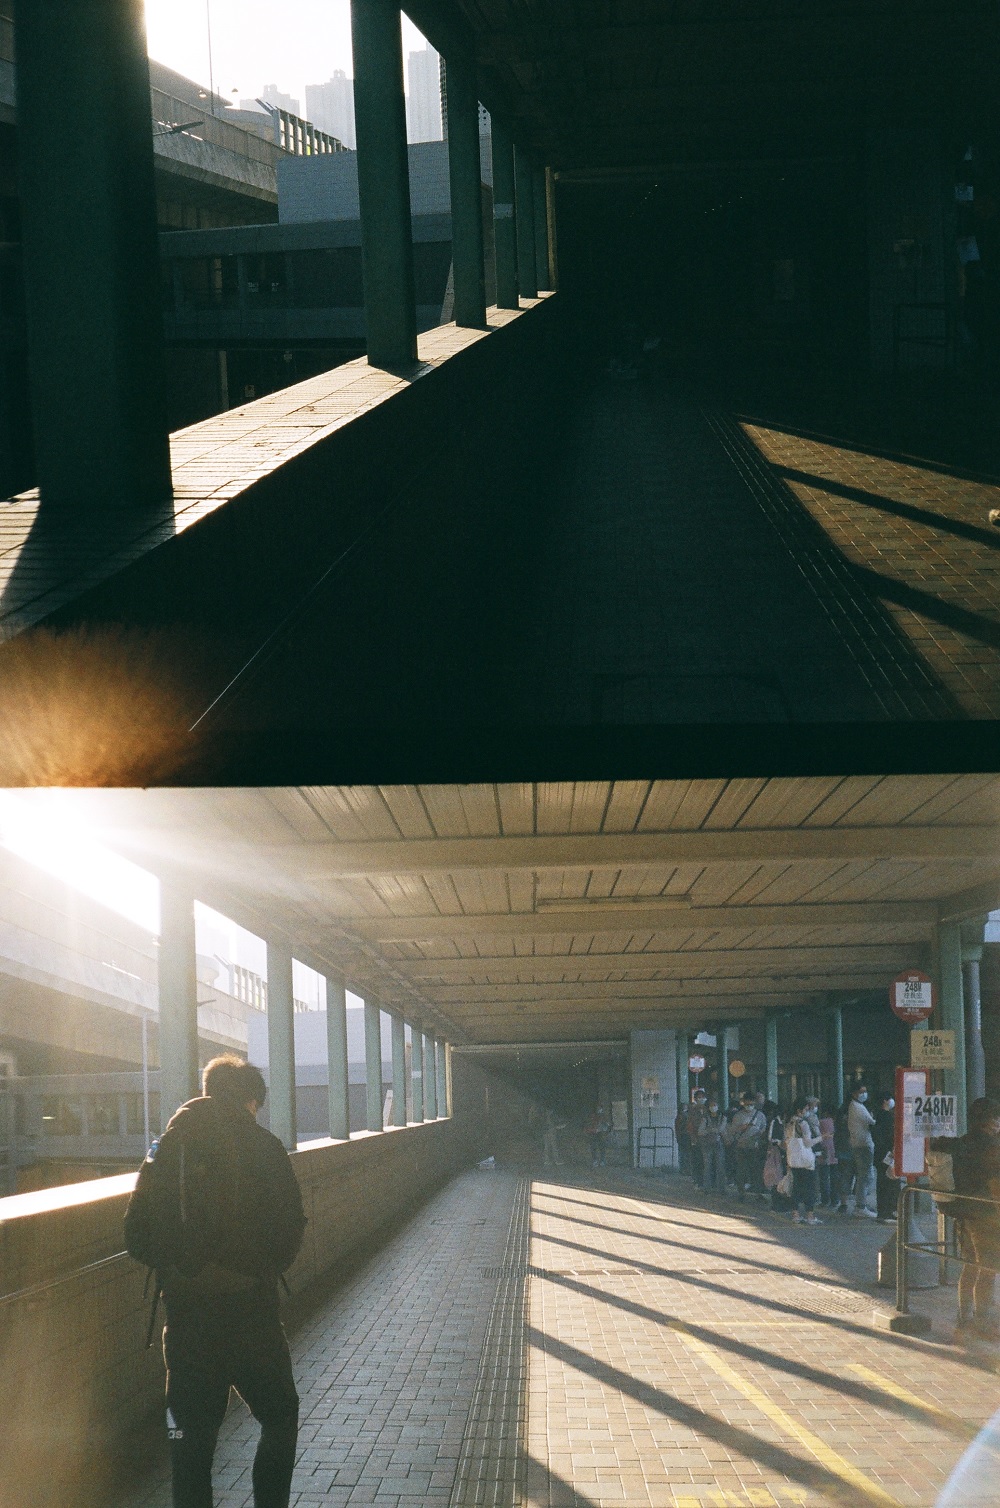 Light leaks from the shot below affecting the image above